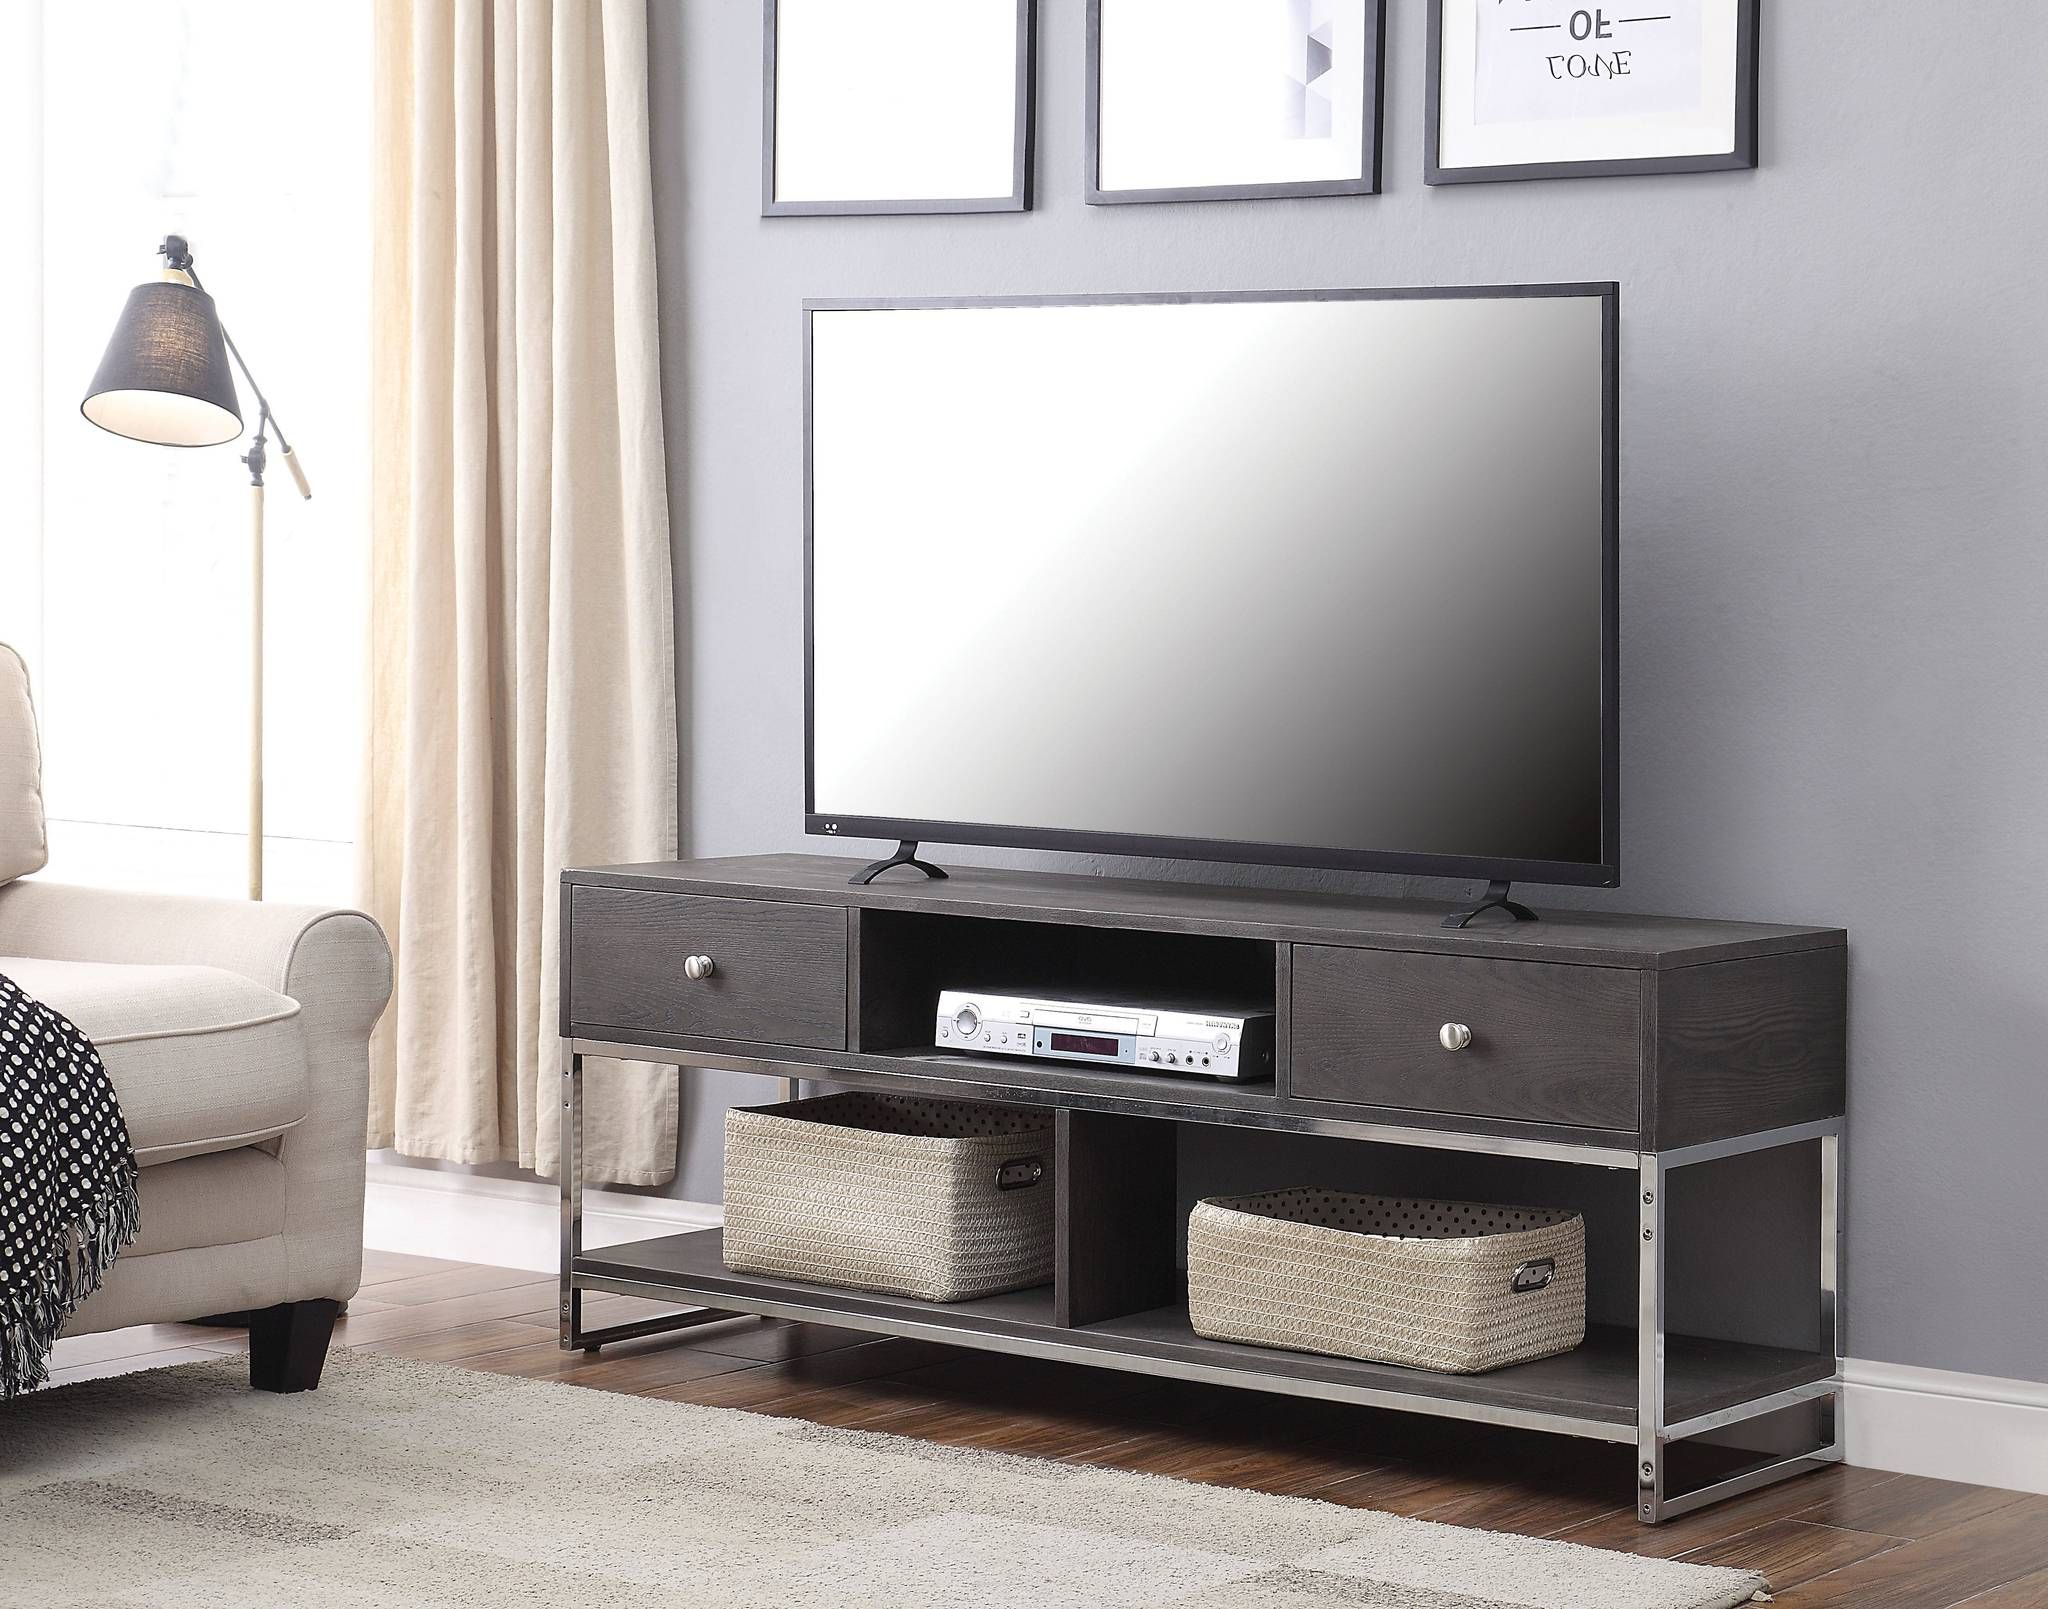 Recent 91204 Iban Gray Wood Metal Finish Modern Tv Stand With Modern Black Tv Stands On Wheels With Metal Cart (Photo 1 of 10)